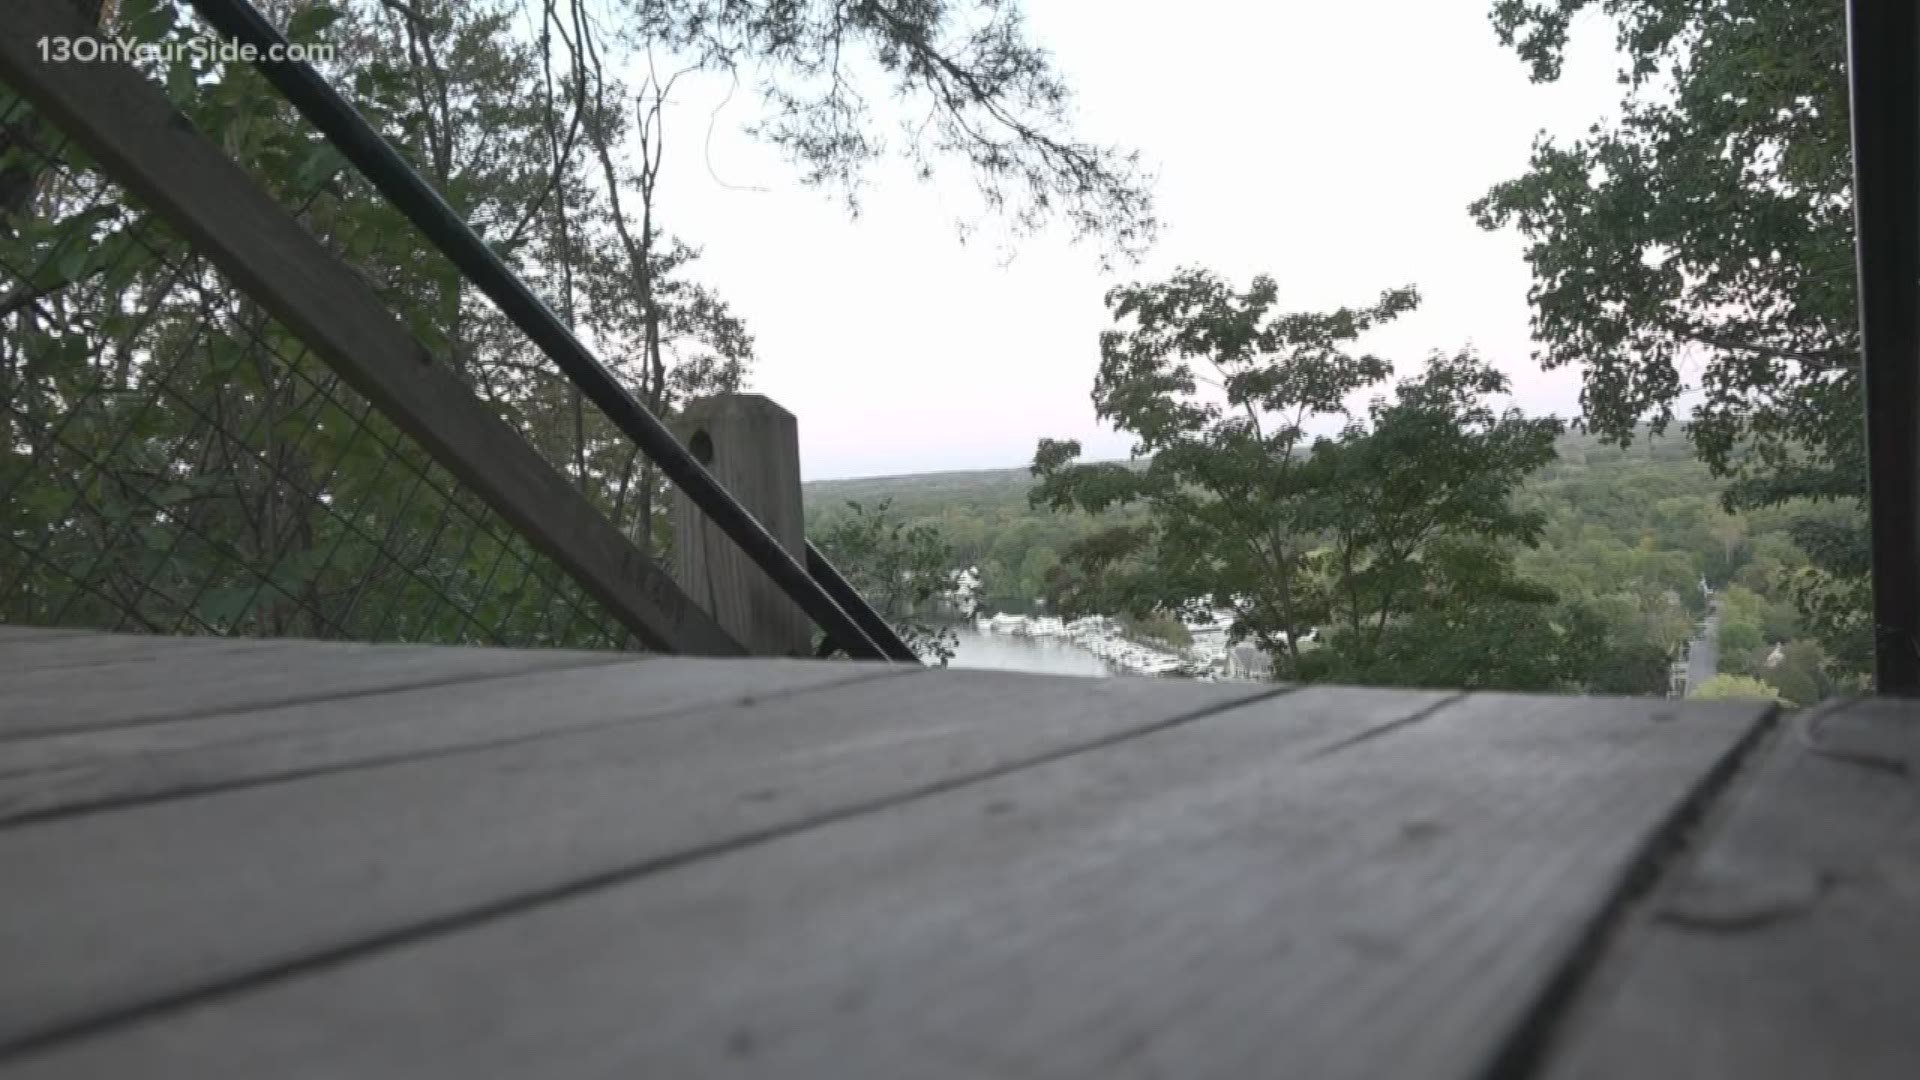 Saugatuck is trying to reverse the damage done to the Mount Baldhead dune.